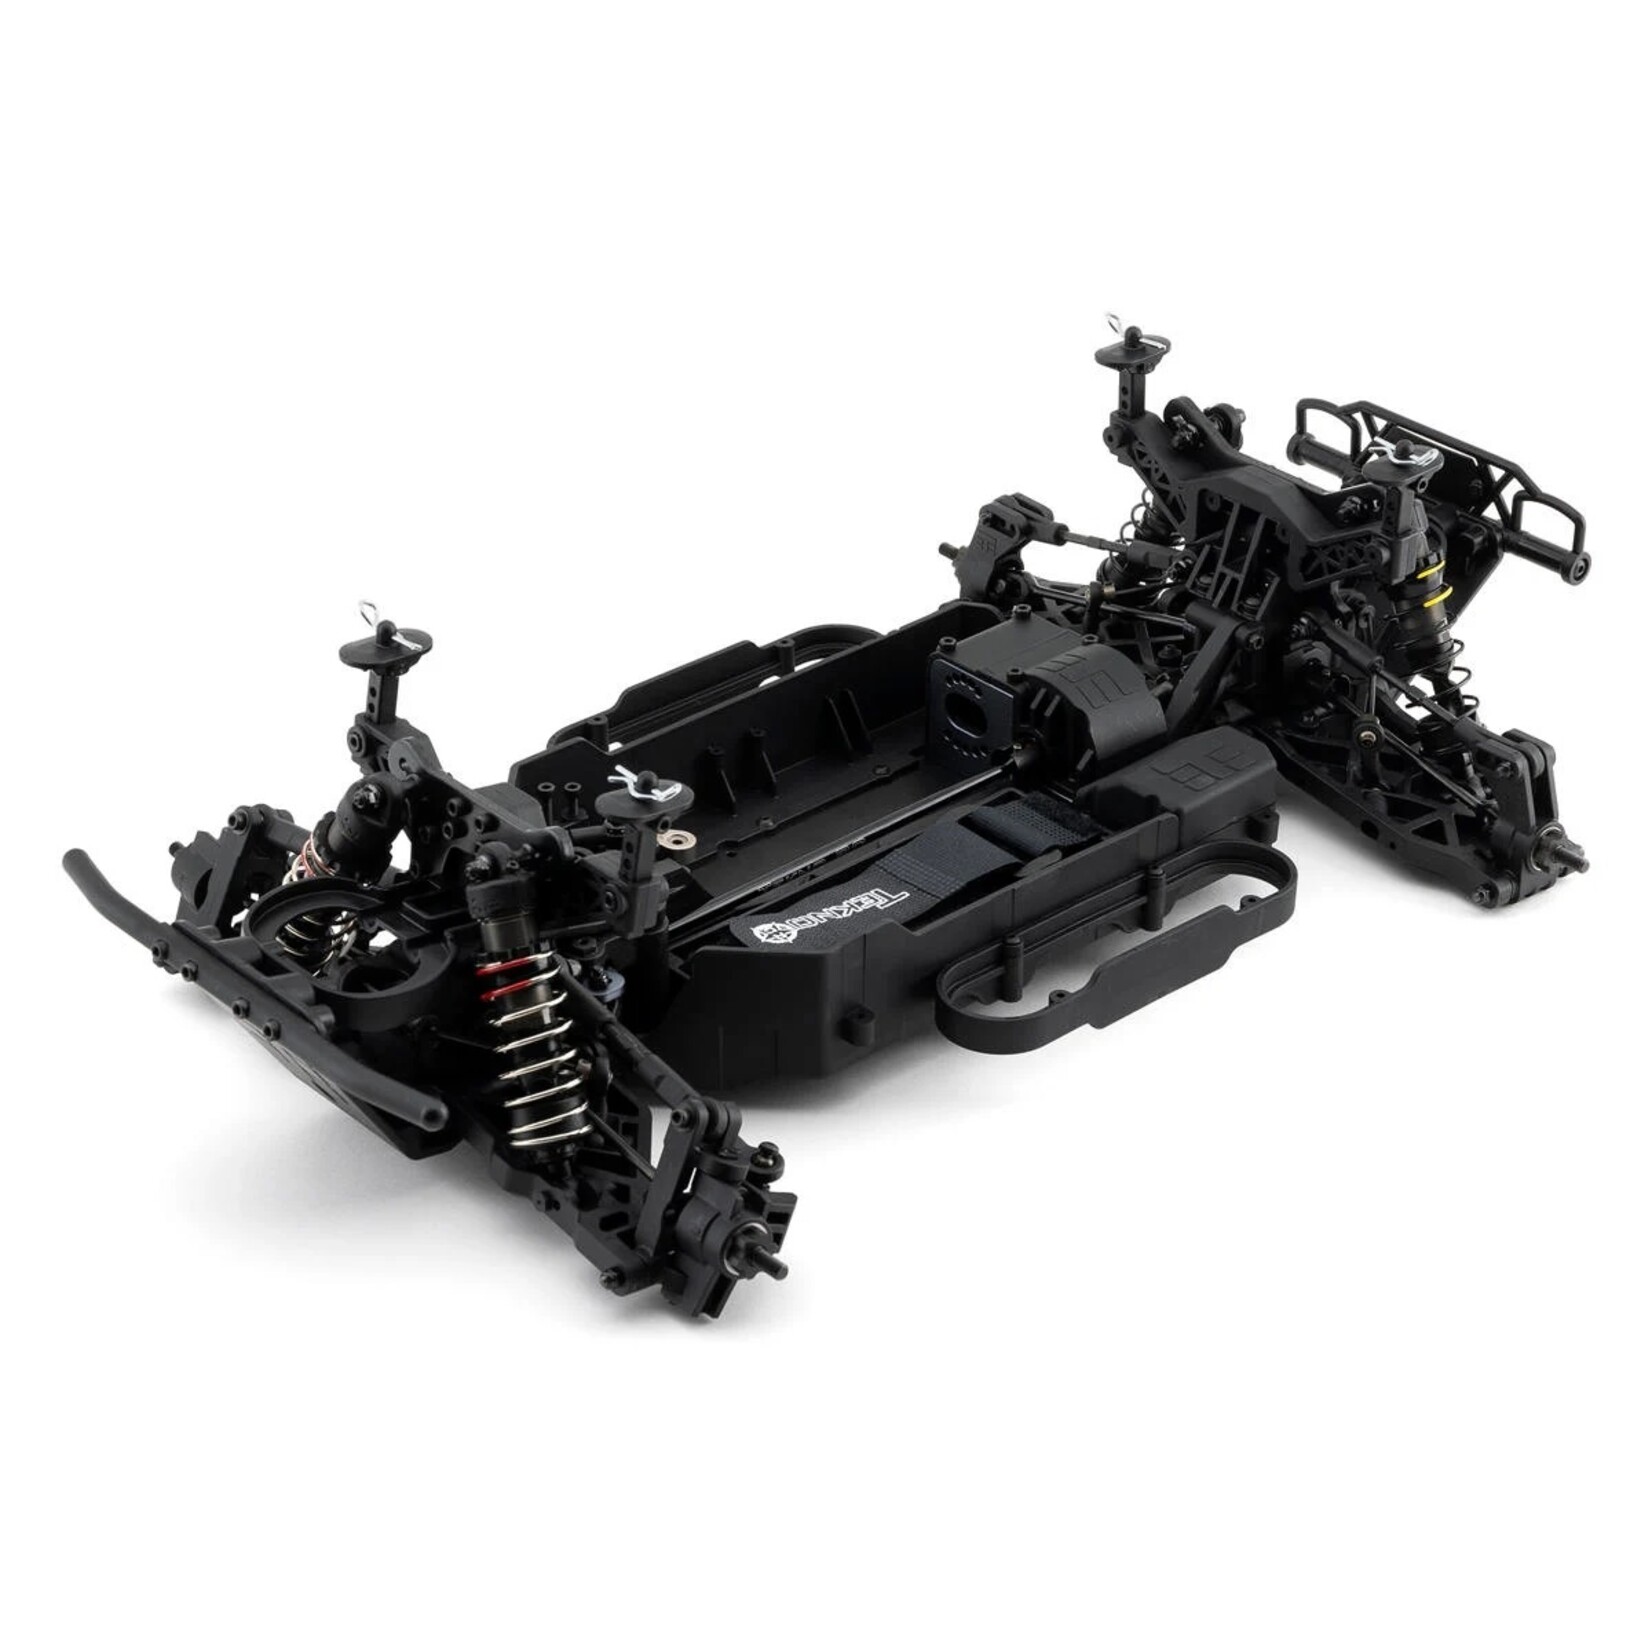 Tekno RC Tekno RC SCT410 2.0 Competition 1/10 Electric 4WD Short Course Truck Kit #TKR9500